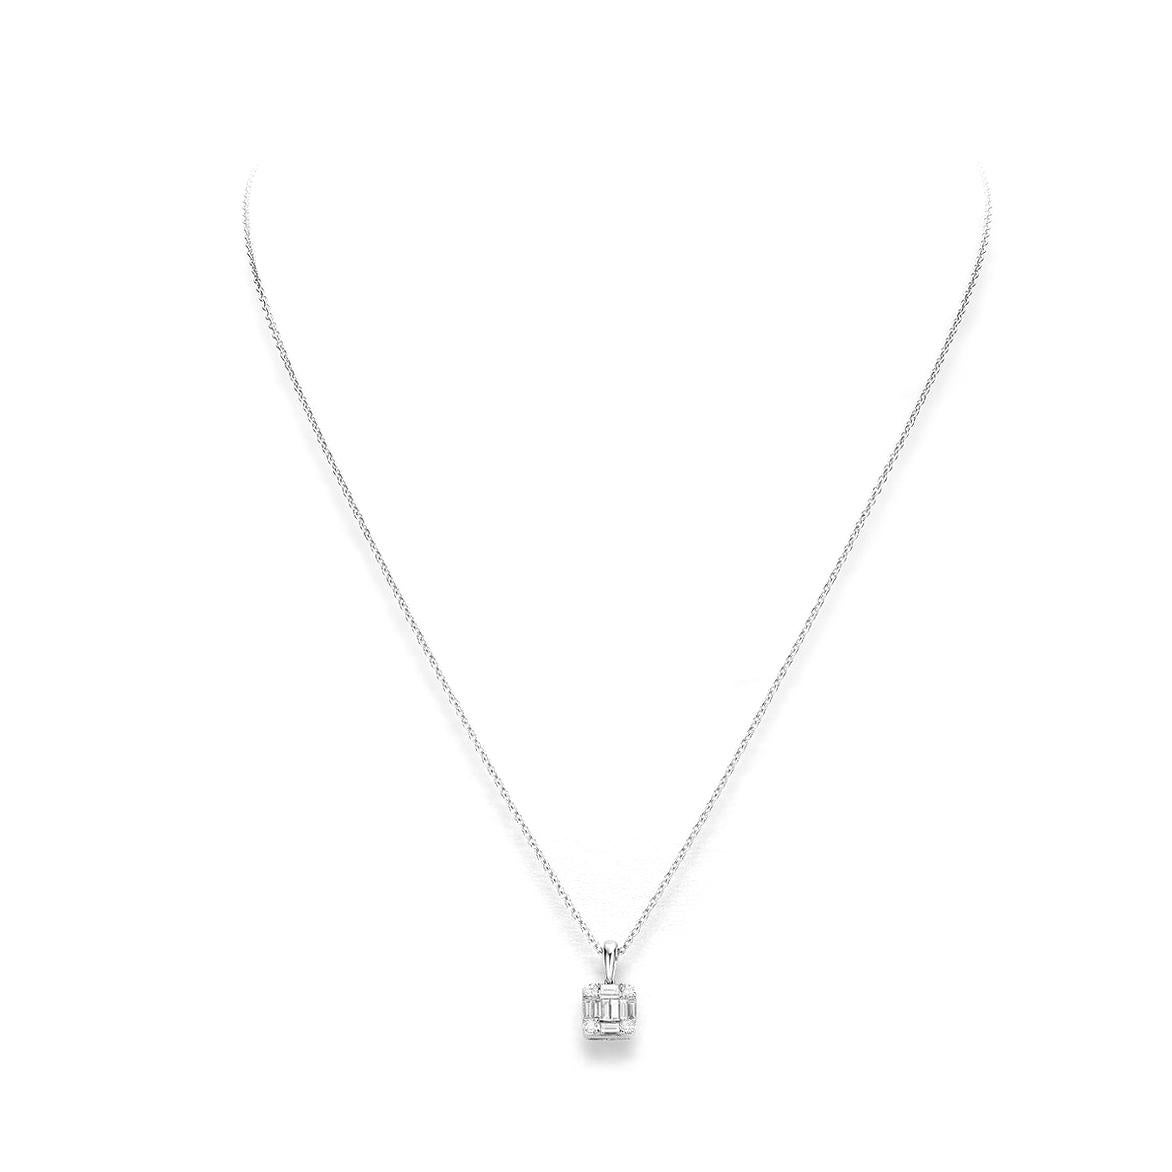 Pendant in 18kt white gold set with 4 diamonds 0.14 cts and 8 baguette cut diamonds 0.35 cts        